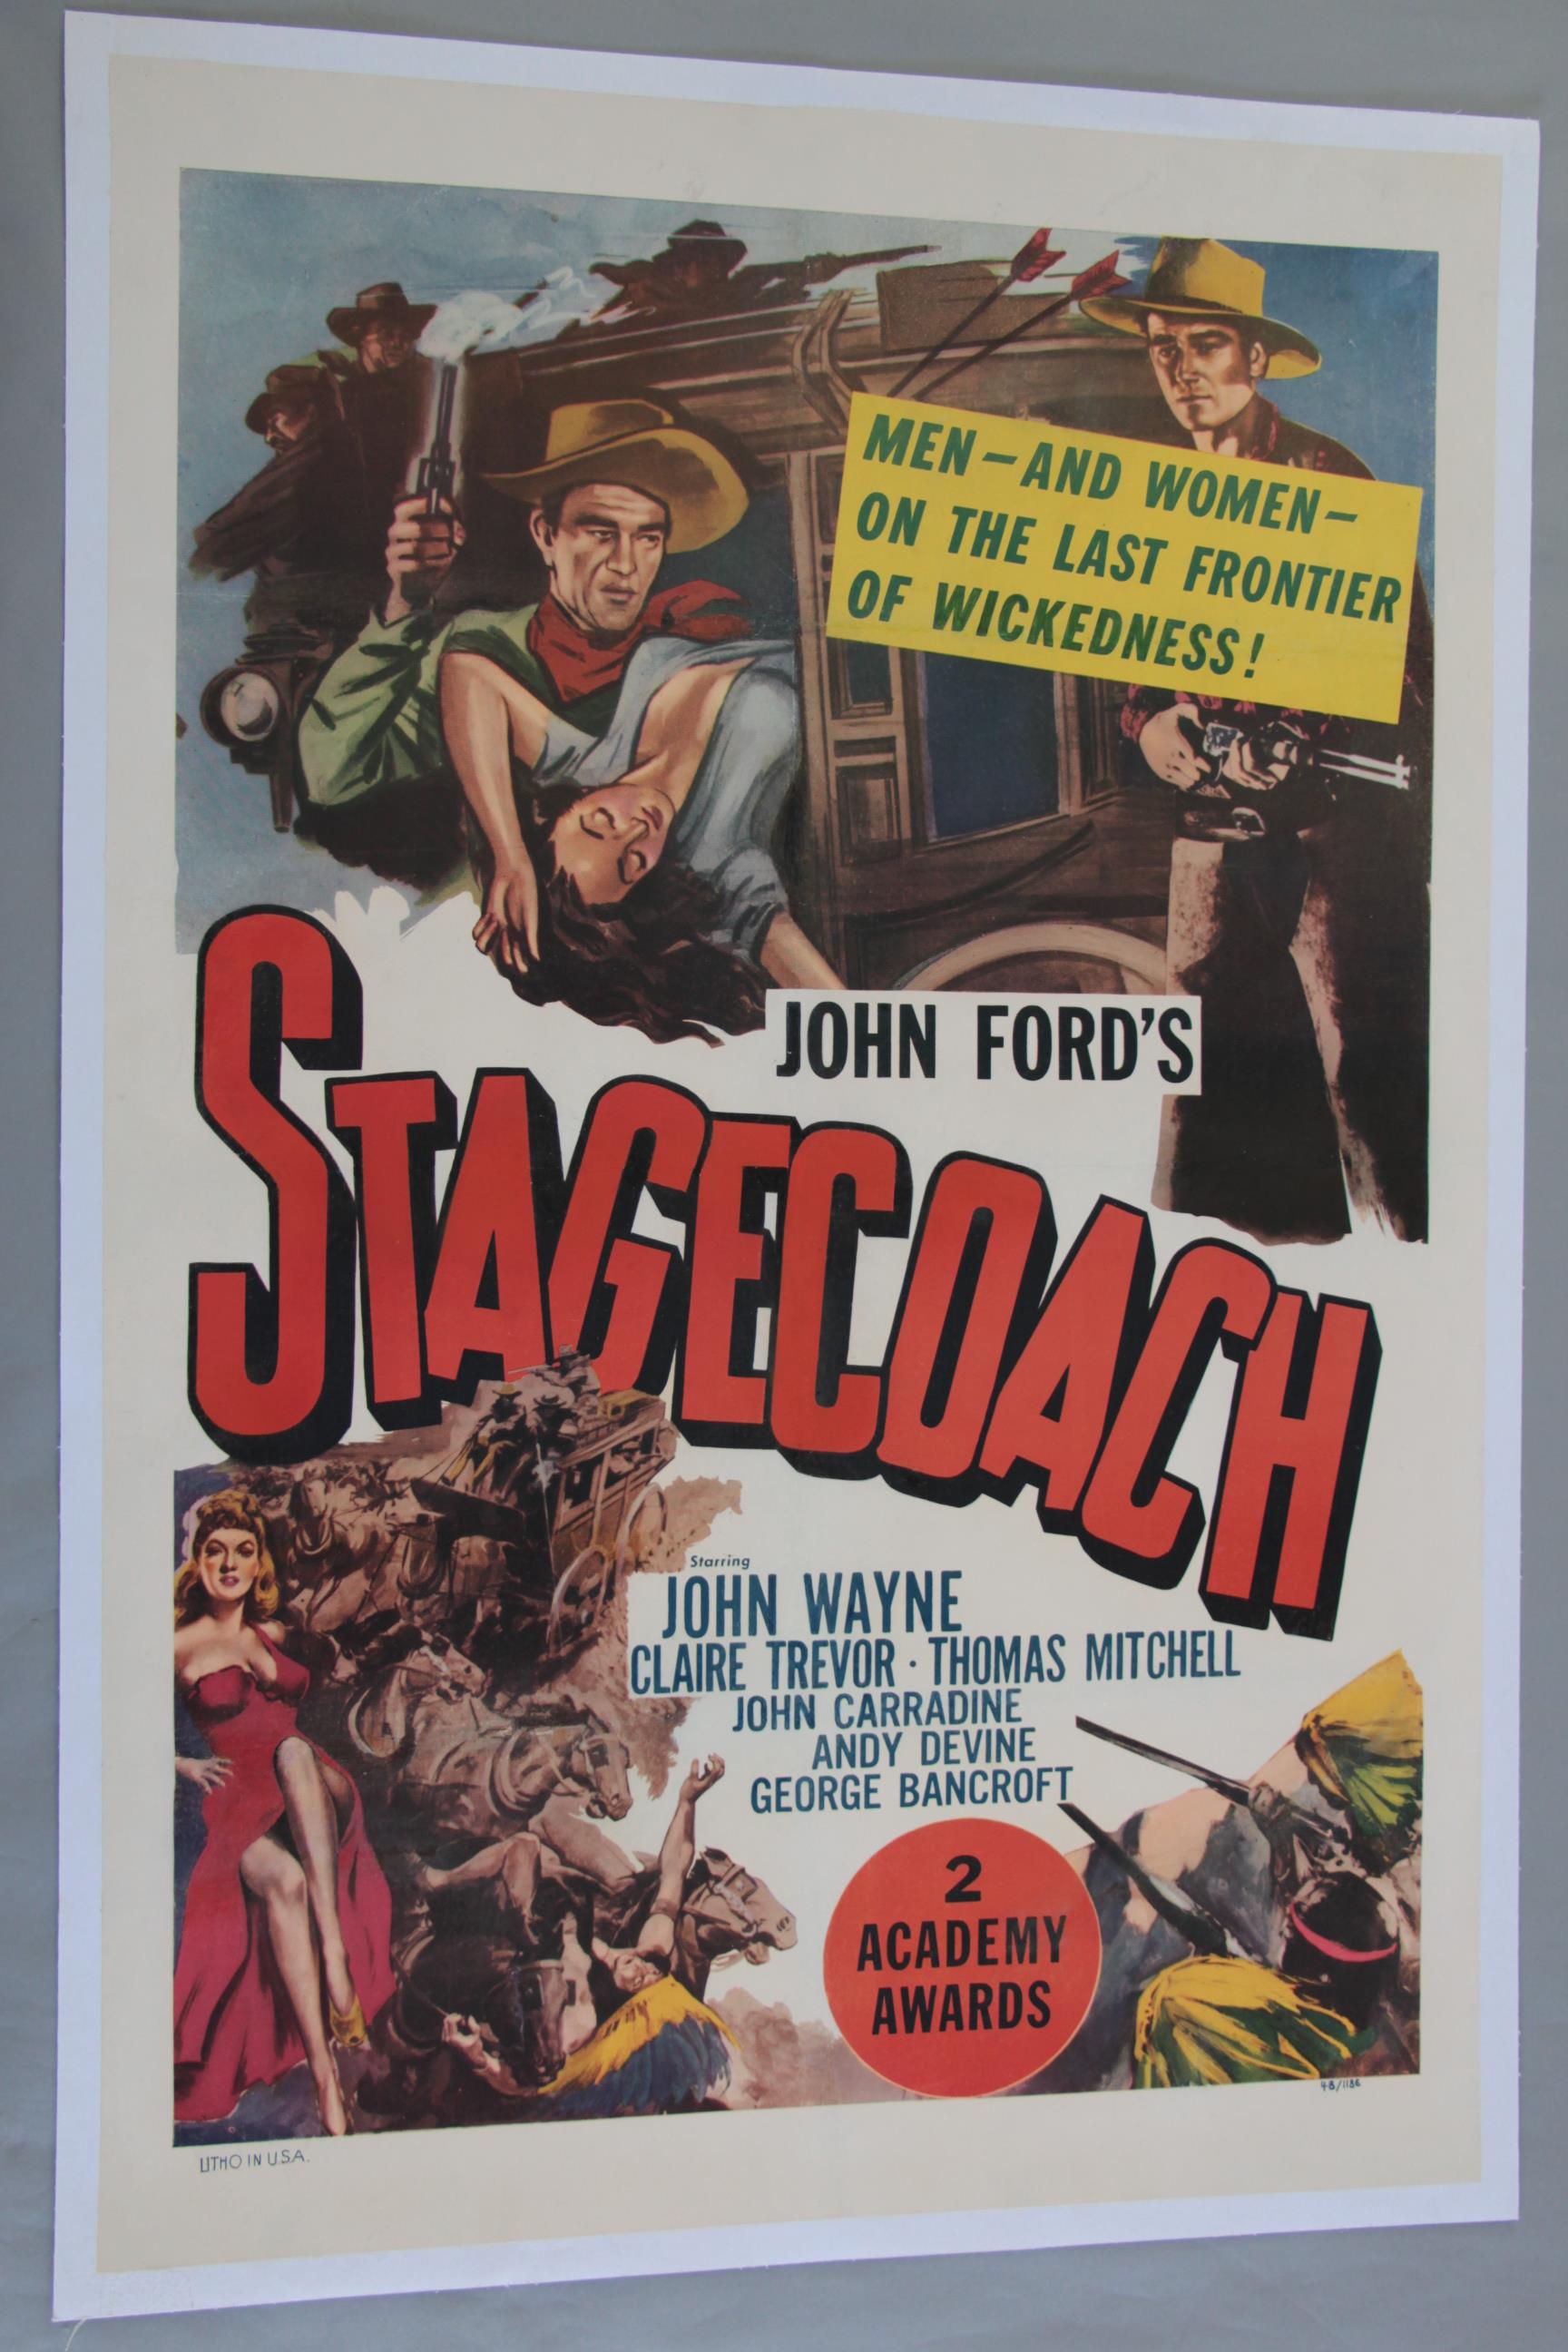 Stagecoach US one sheet film poster for the John Ford directed classic starring John Wayne with